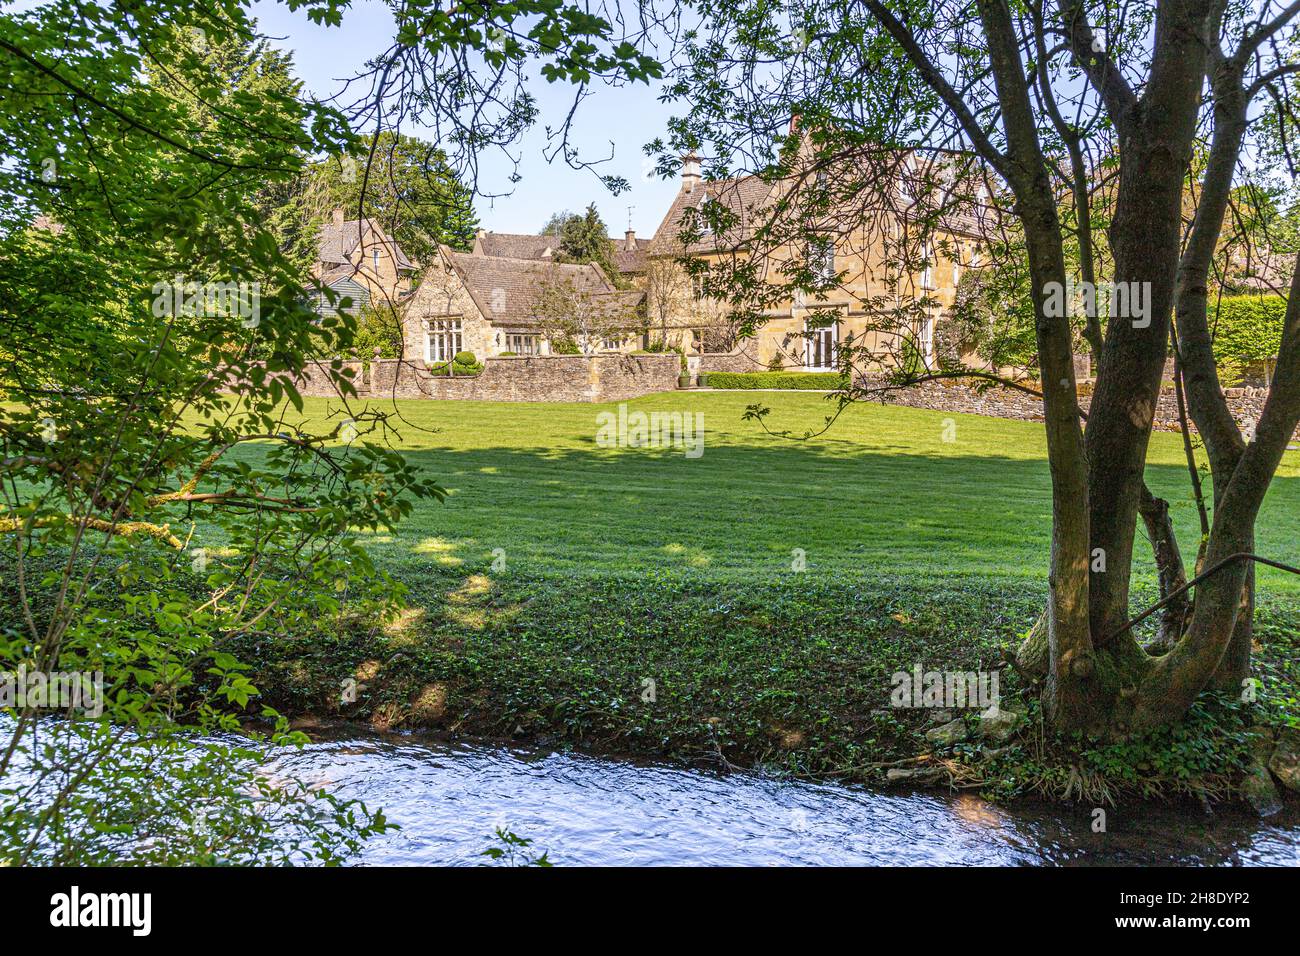 The Manor House beside the infant River Windrush as it flows through the Cotswold village of Naunton, Gloucestershire UK Stock Photo